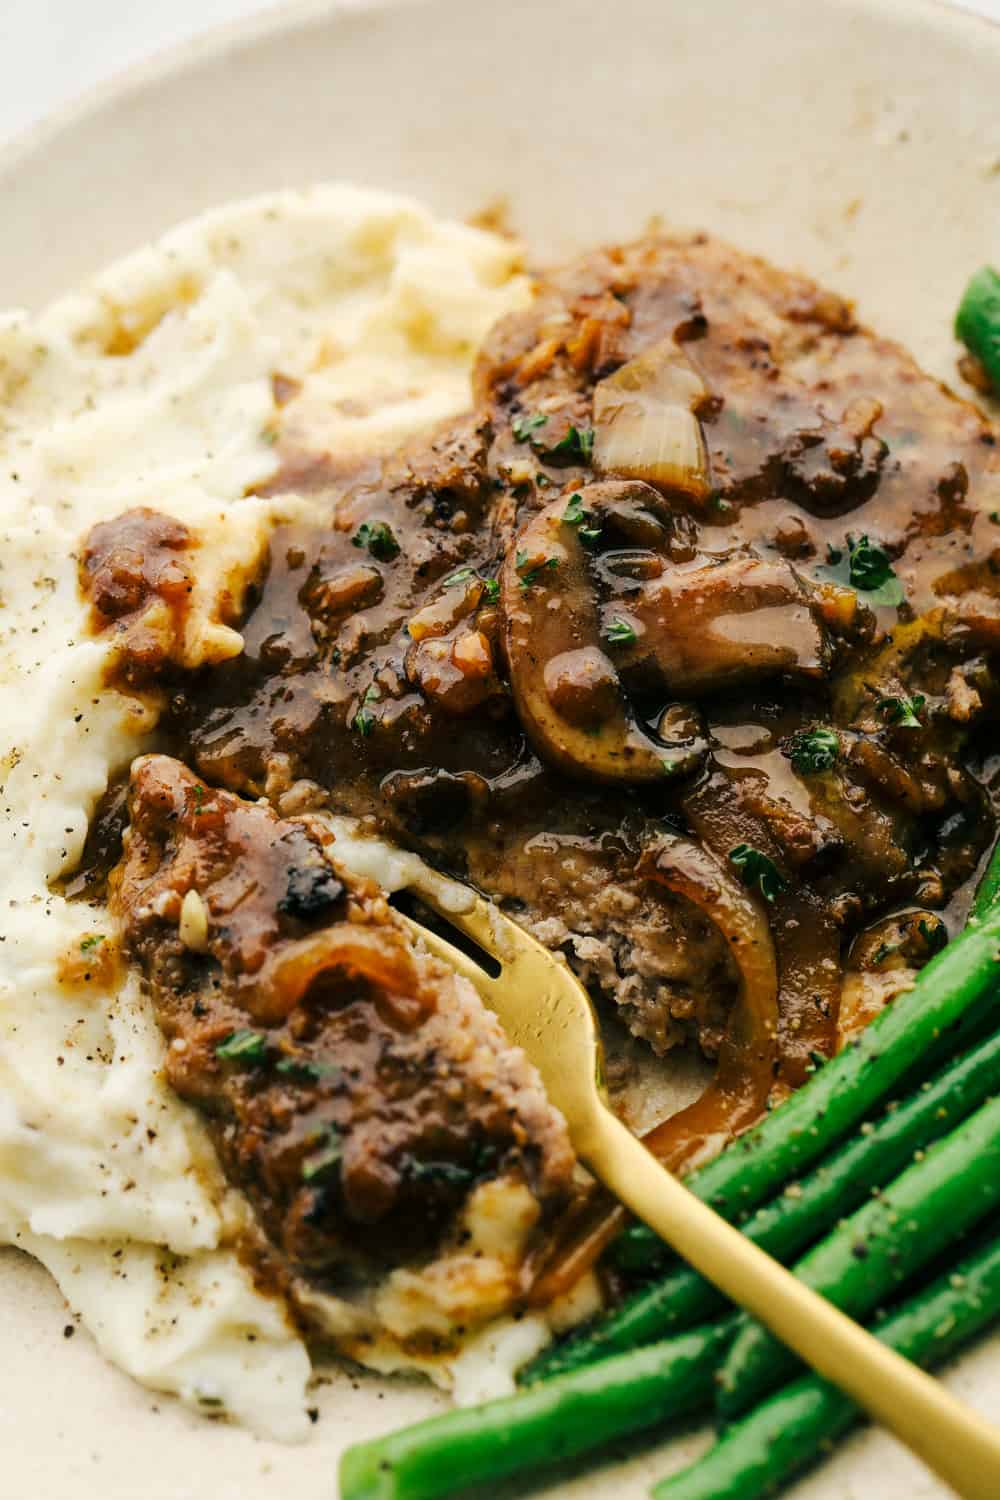 Cube steak with mashed potatoes and mushroom gravy with a side of green beans.